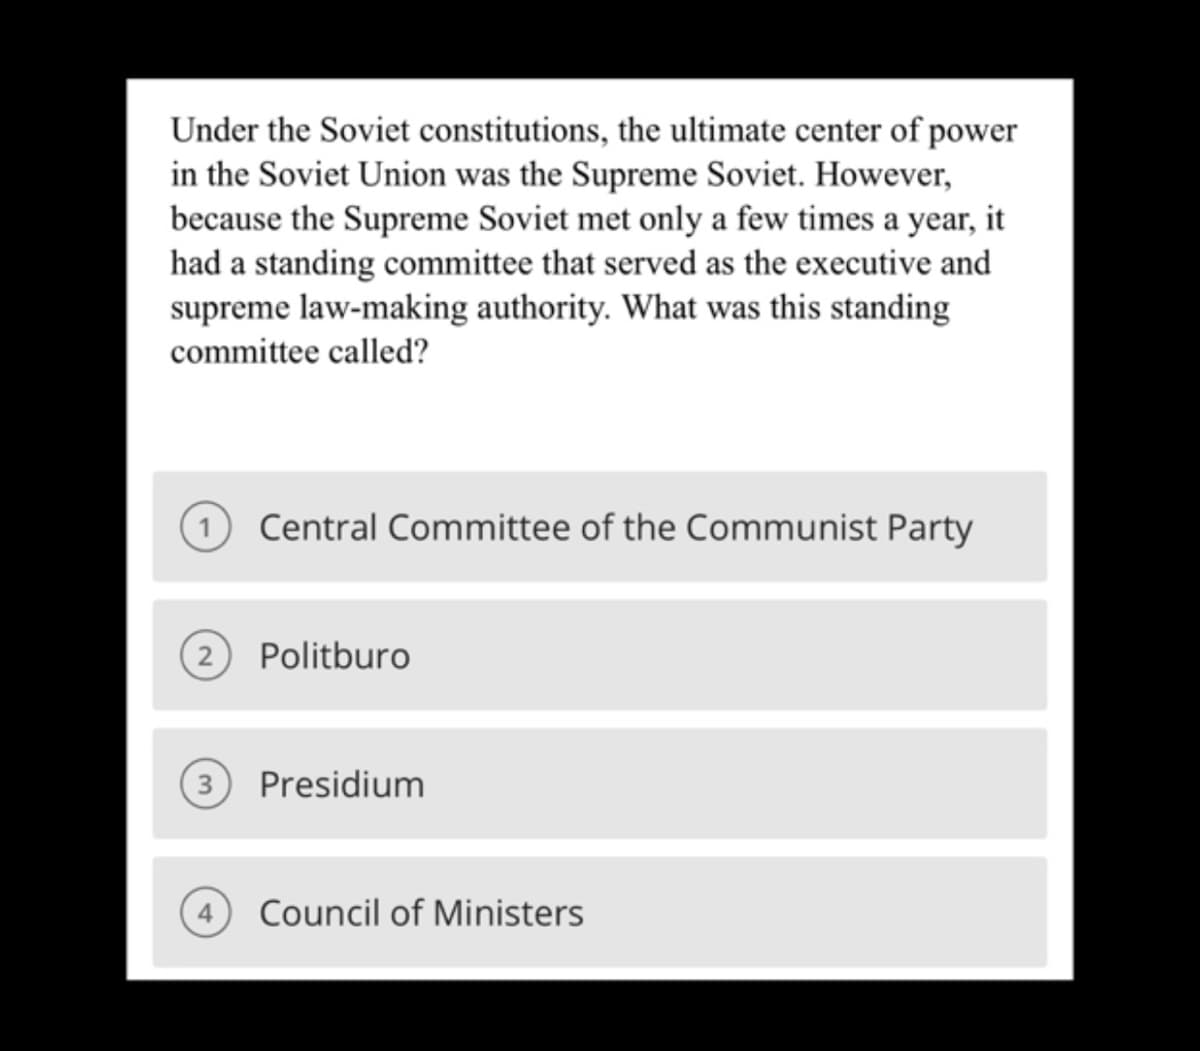 Under the Soviet constitutions, the ultimate center of power
in the Soviet Union was the Supreme Soviet. However,
because the Supreme Soviet met only a few times a year, it
had a standing committee that served as the executive and
supreme law-making authority. What was this standing
committee called?
1 Central Committee of the Communist Party
(2) Politburo
(3) Presidium
4 Council of Ministers